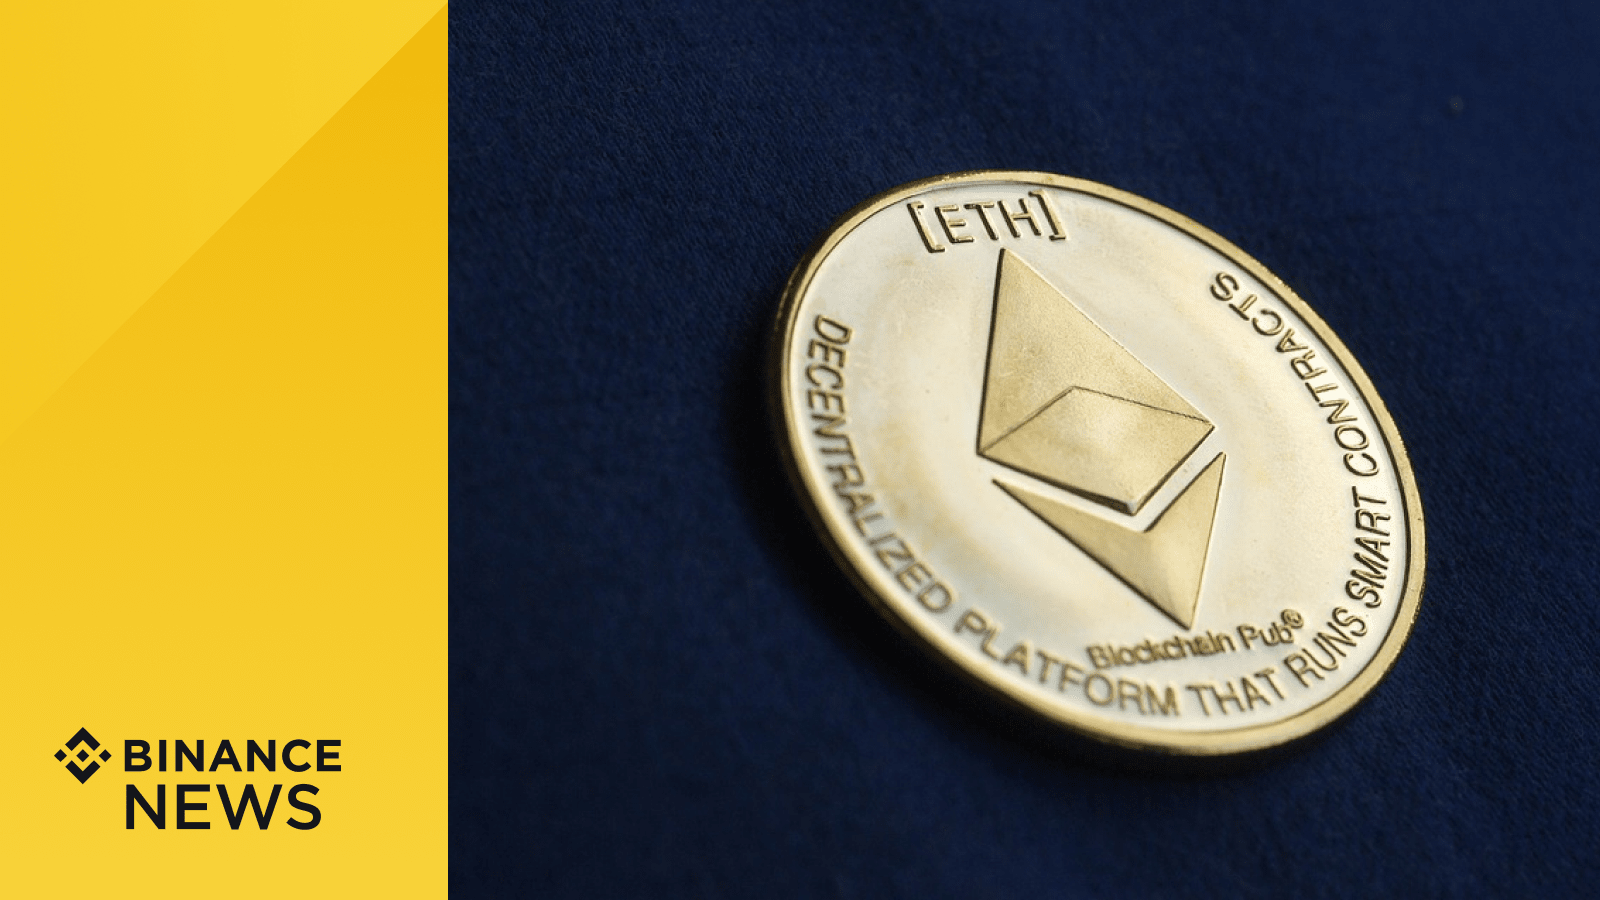  Binance Will Evaluate ETHW Before Making It Available On The Platform!